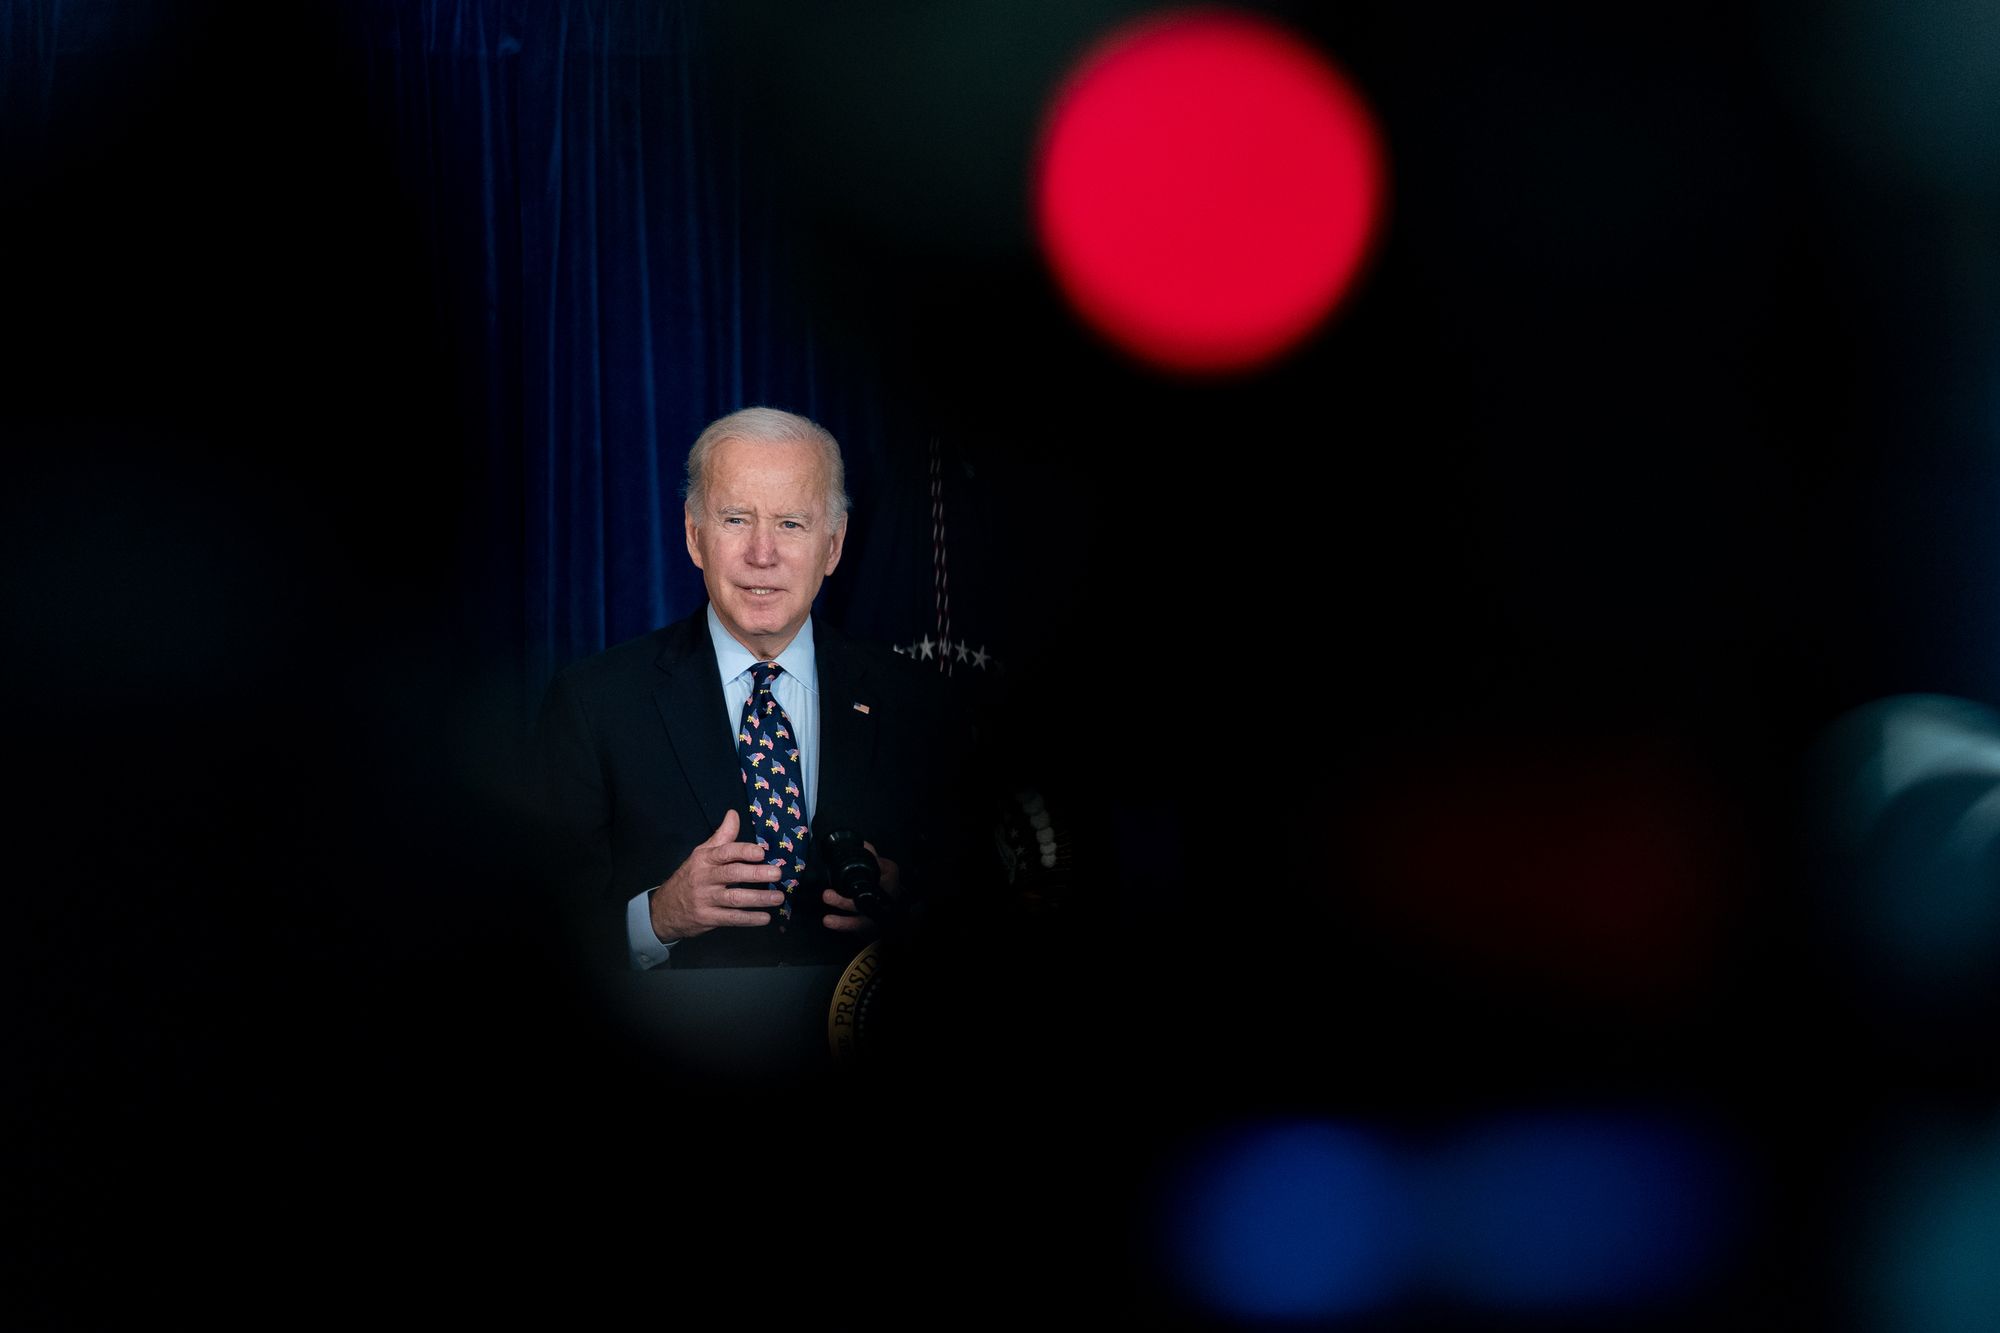 Biden, Trump Hold Double-Digit Leads In Their Parties: I&I/TIPP Poll